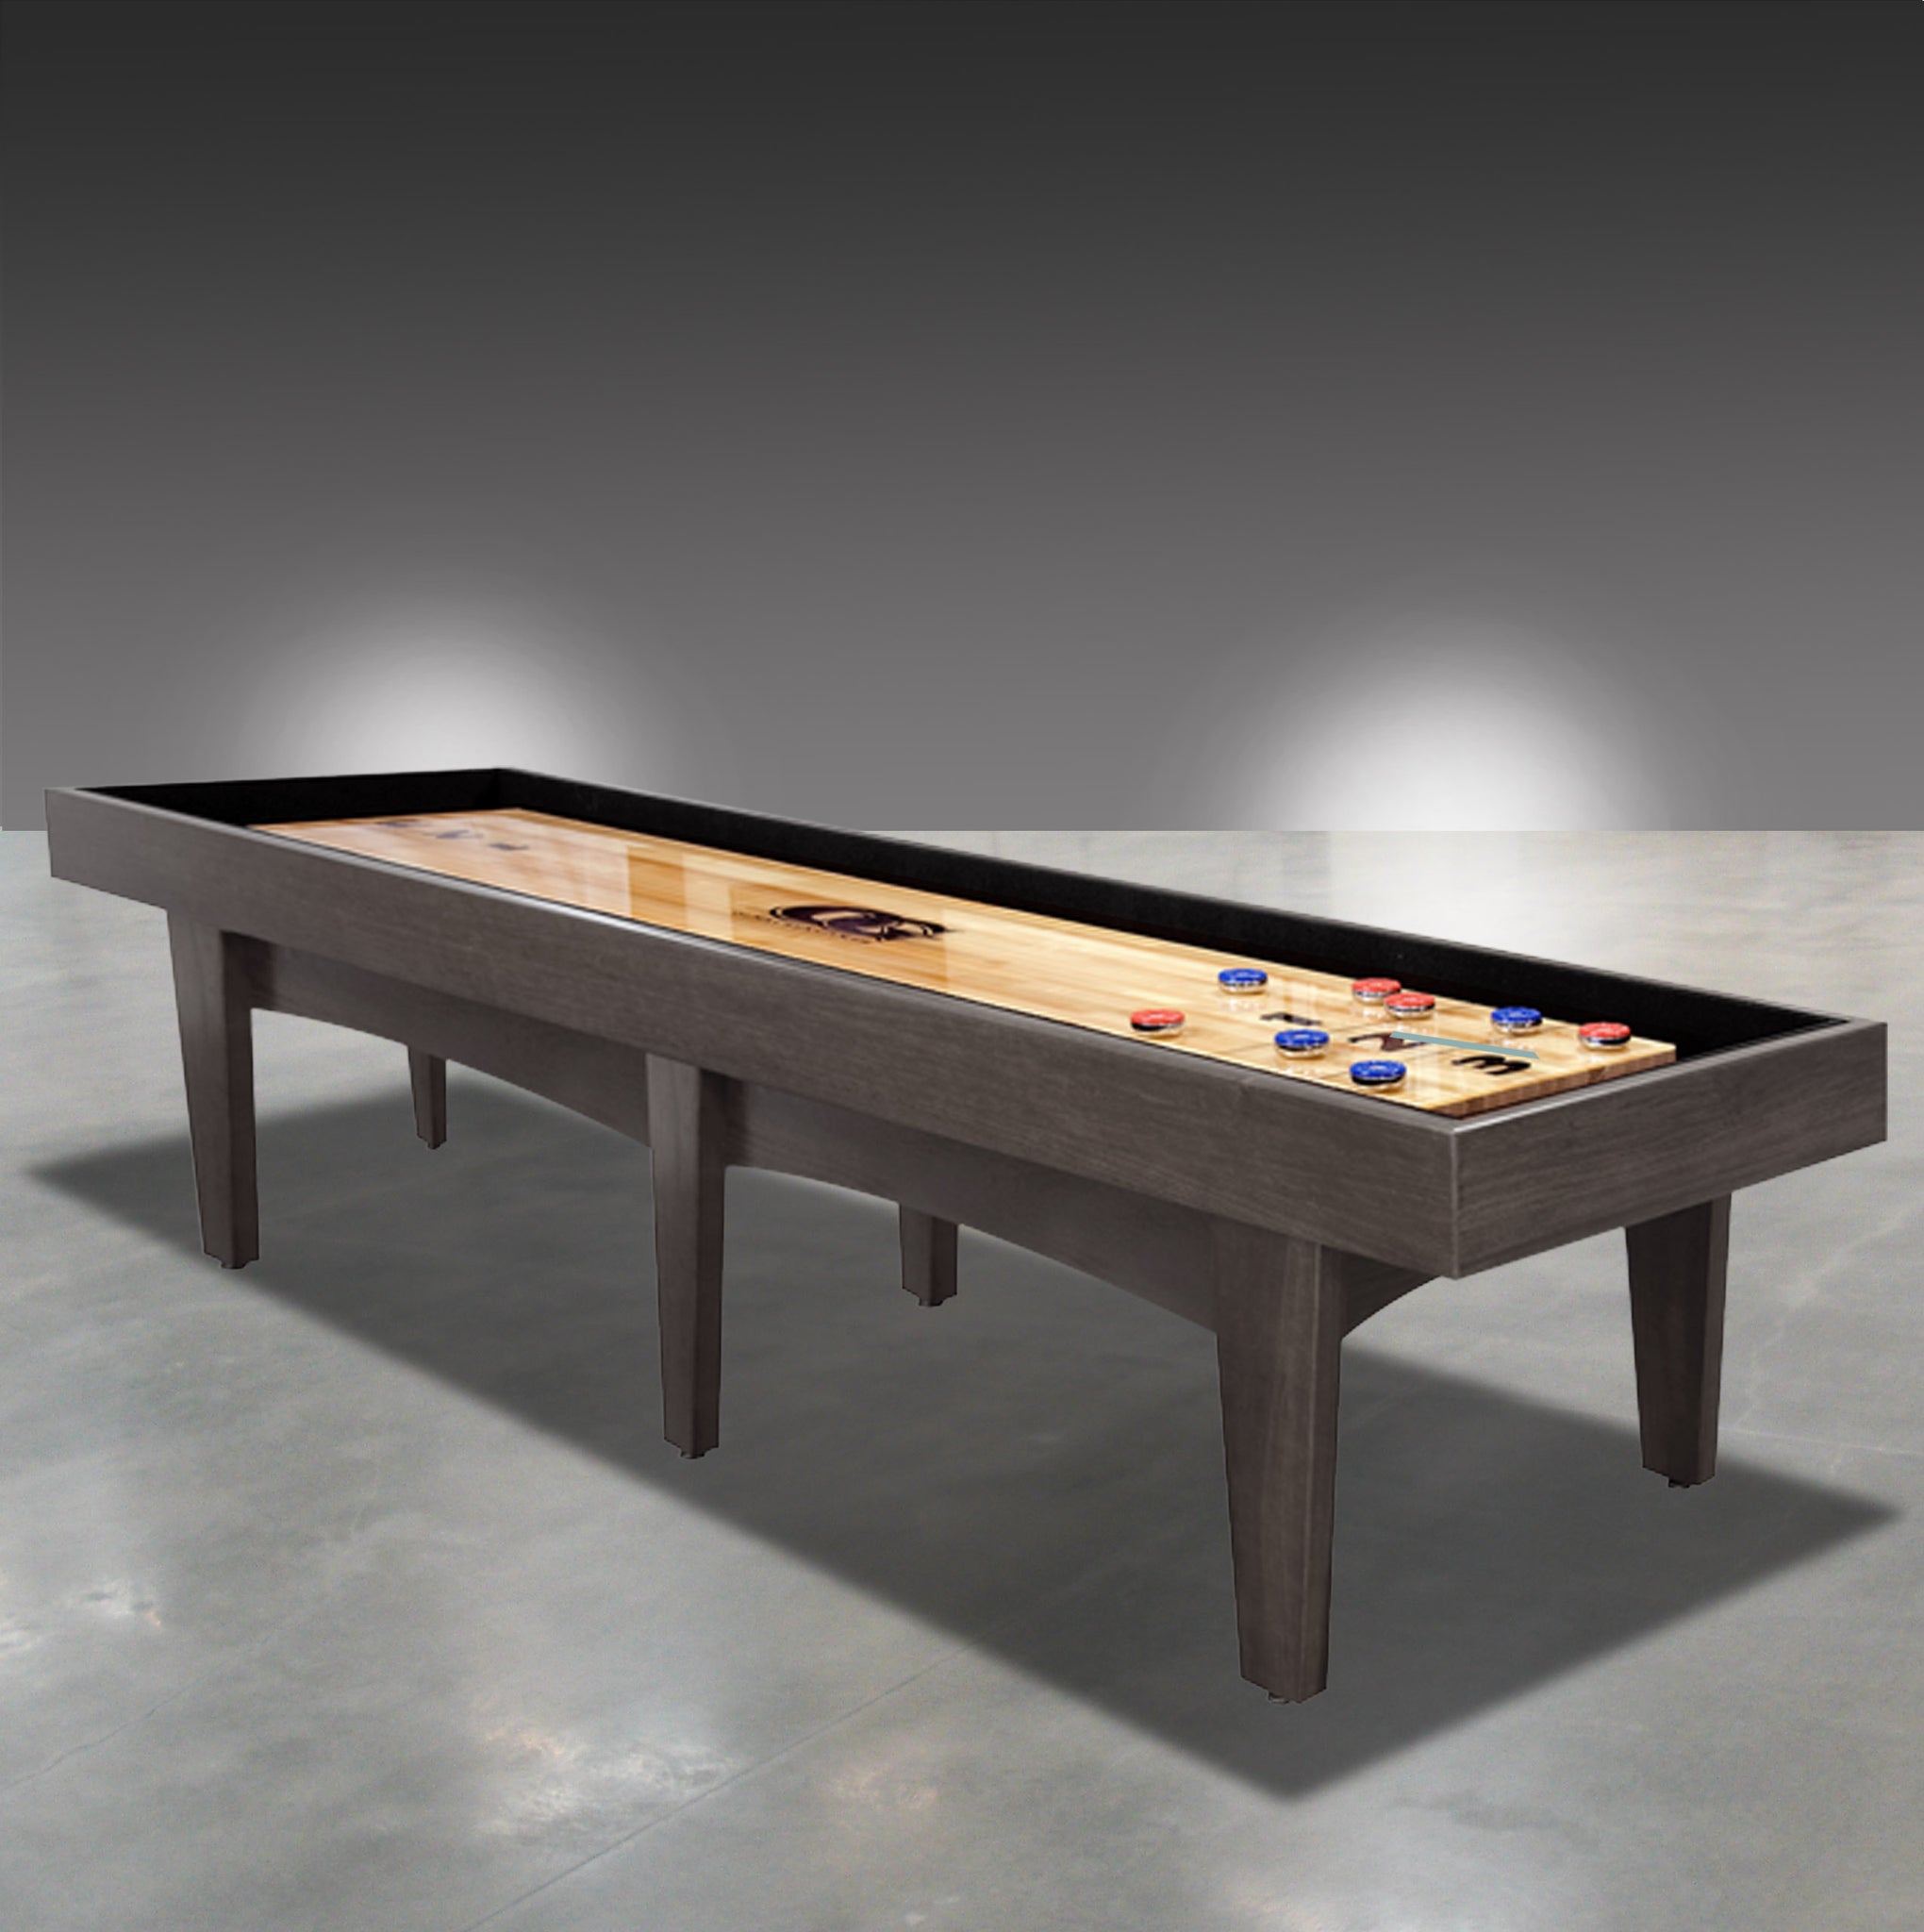 Pavilion hand-crafted Shuffleboard by Olhausen